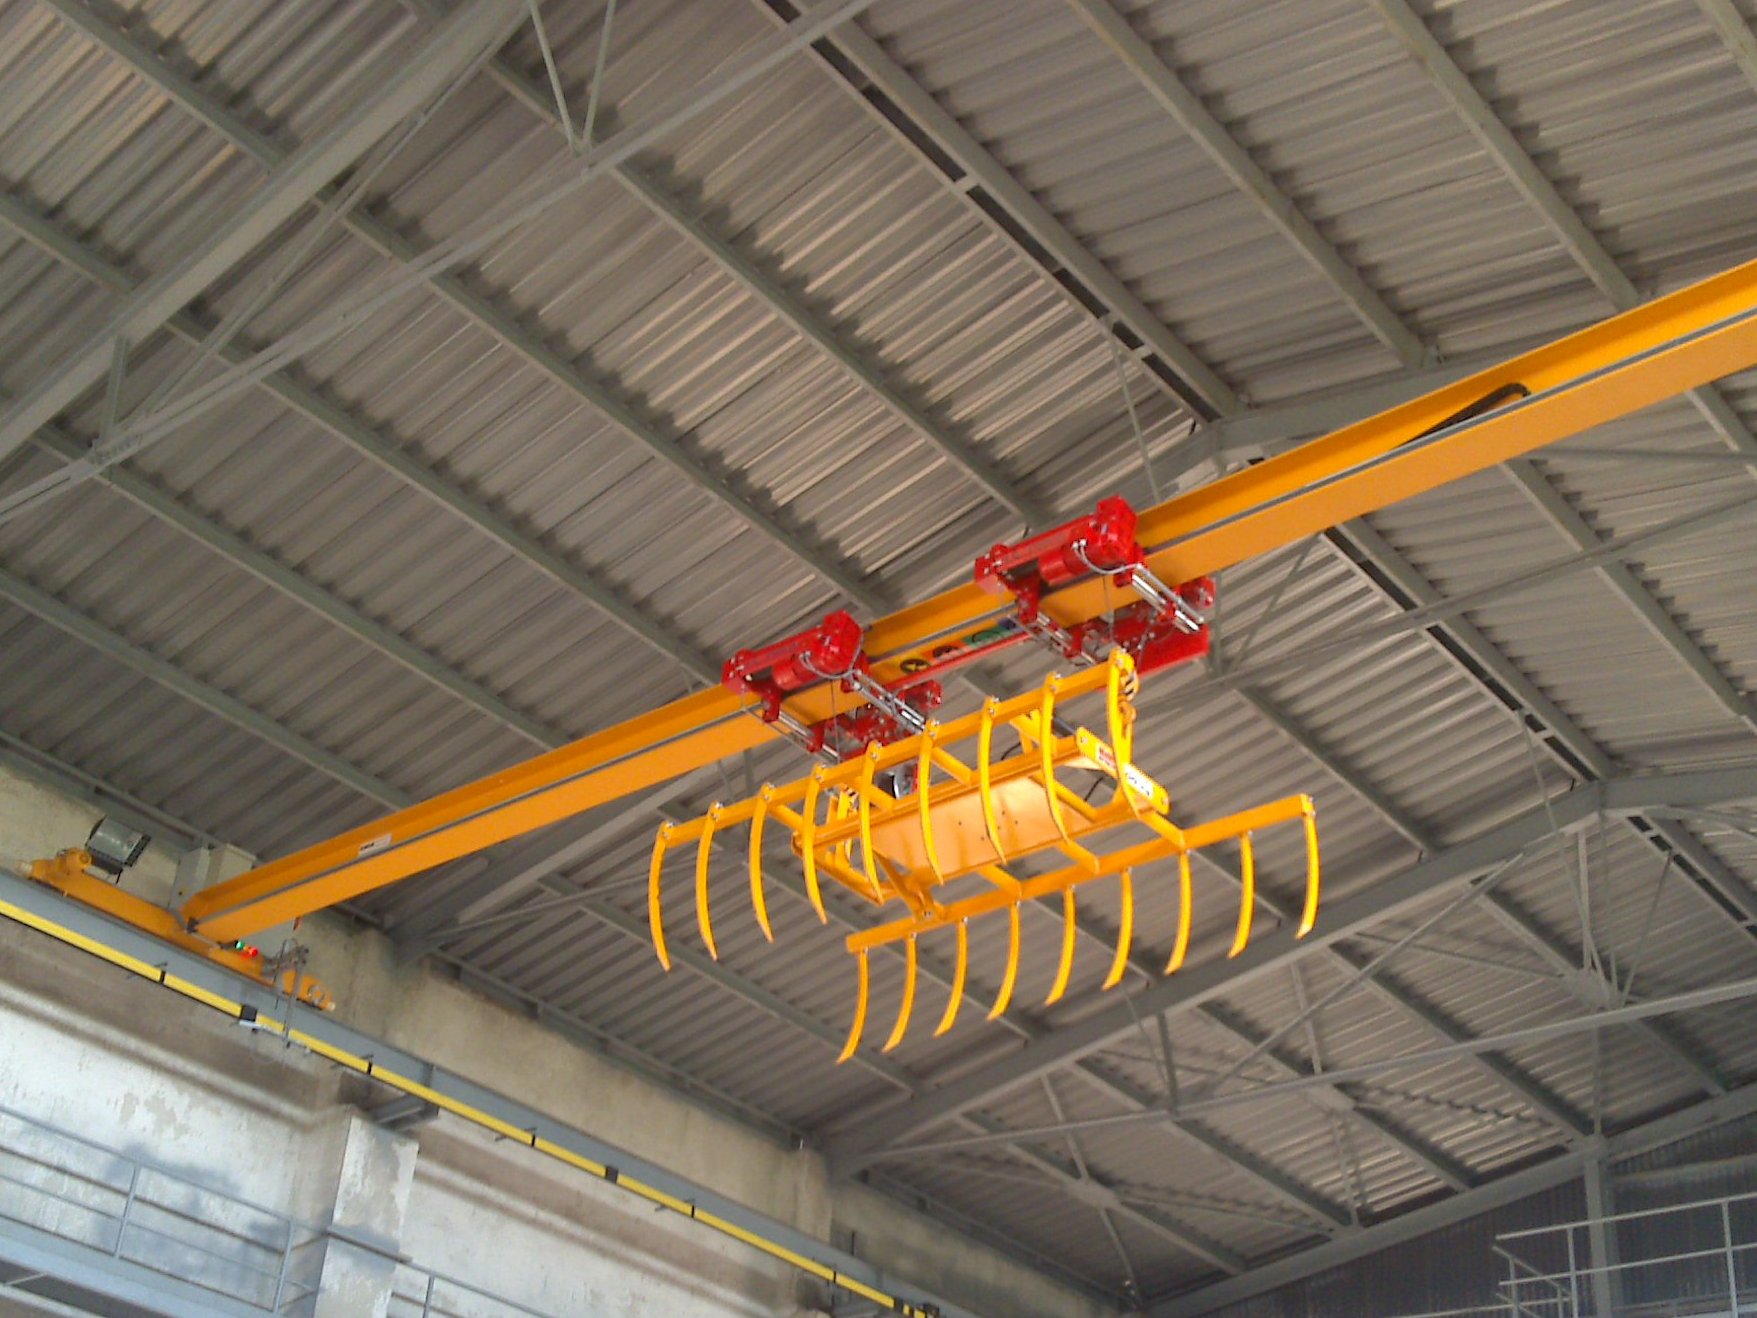 Crane GJMJ 2x0,8t/16m with a grab equipped by anti-swing system